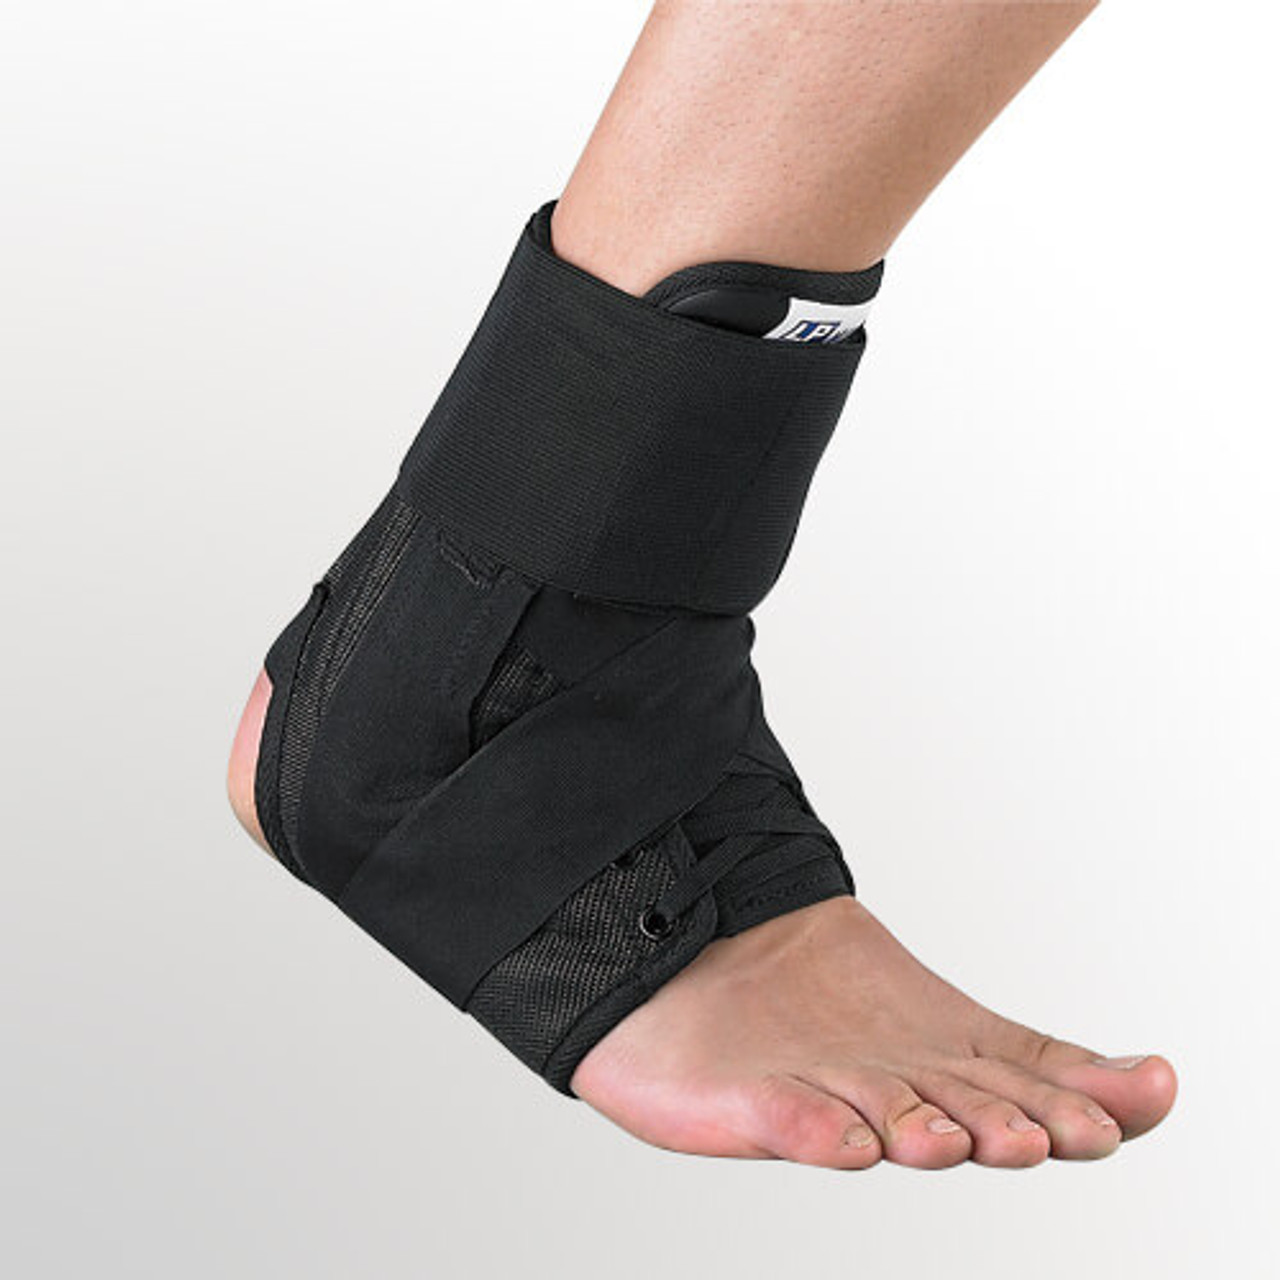 LPS 567-SM(BL) Ankle Brace with Stays & Figure 8 Straps, Small (LPS 567-SM(BL))